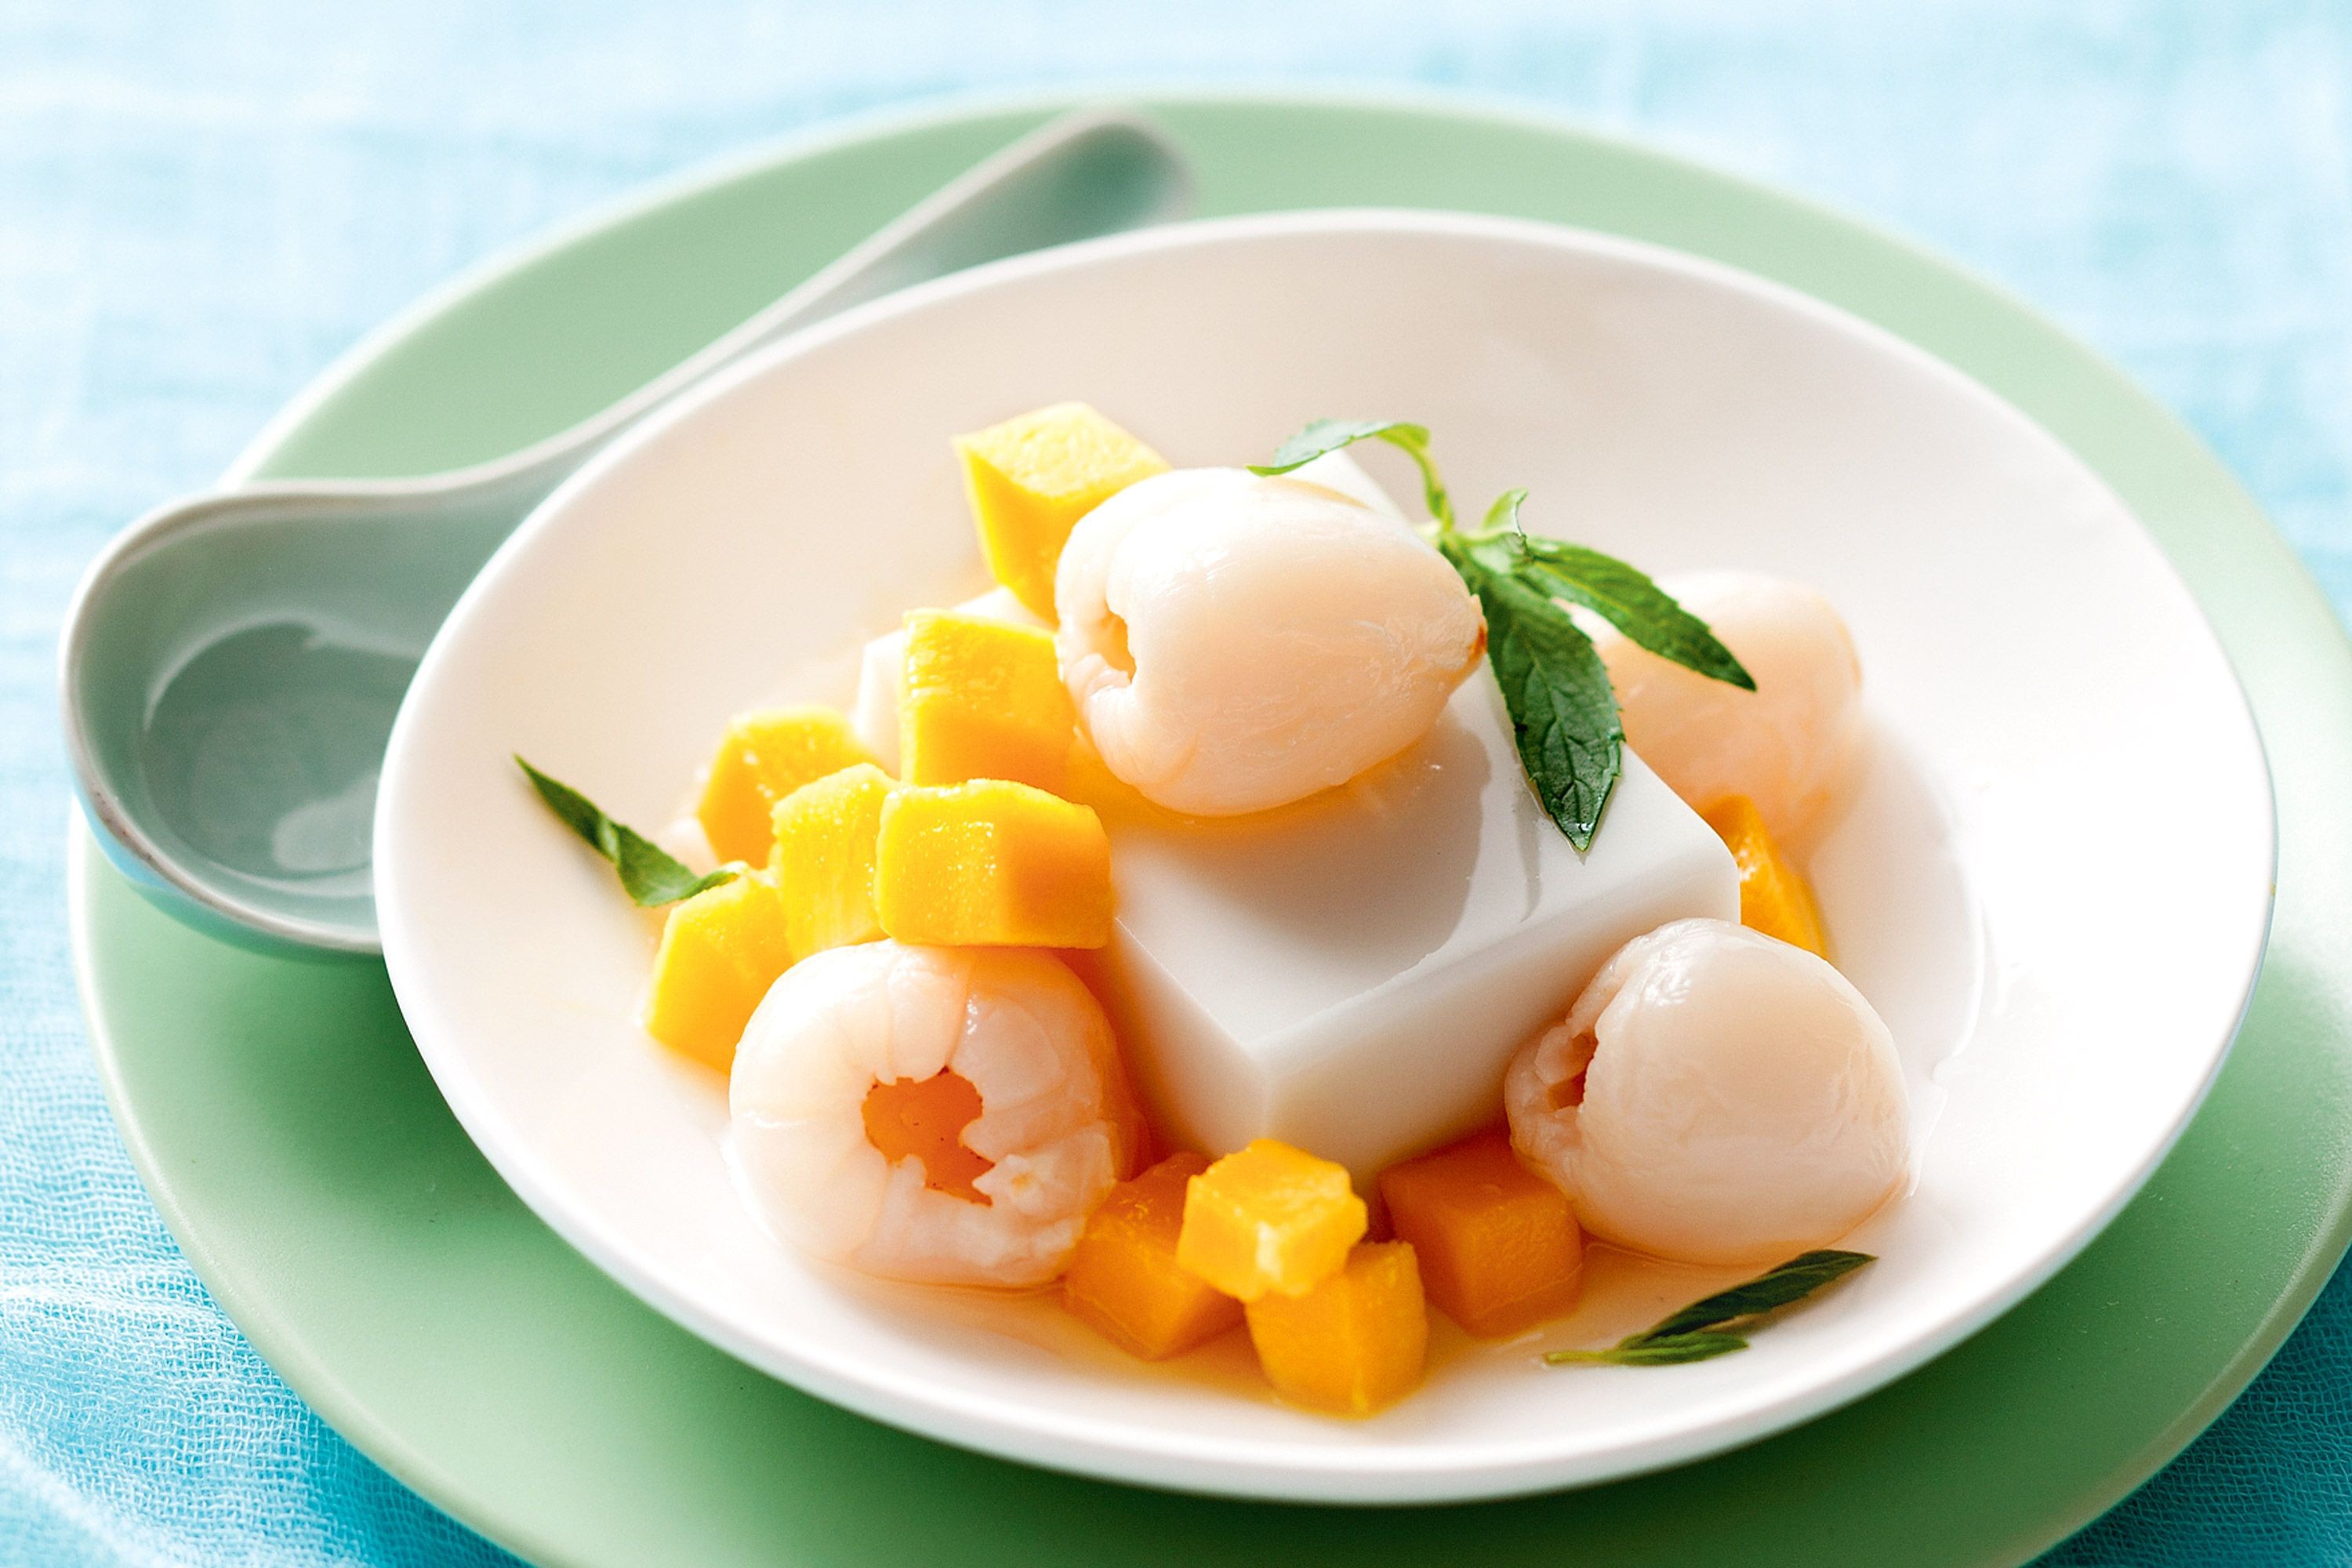 Coconut pudding with lychee and mango salad